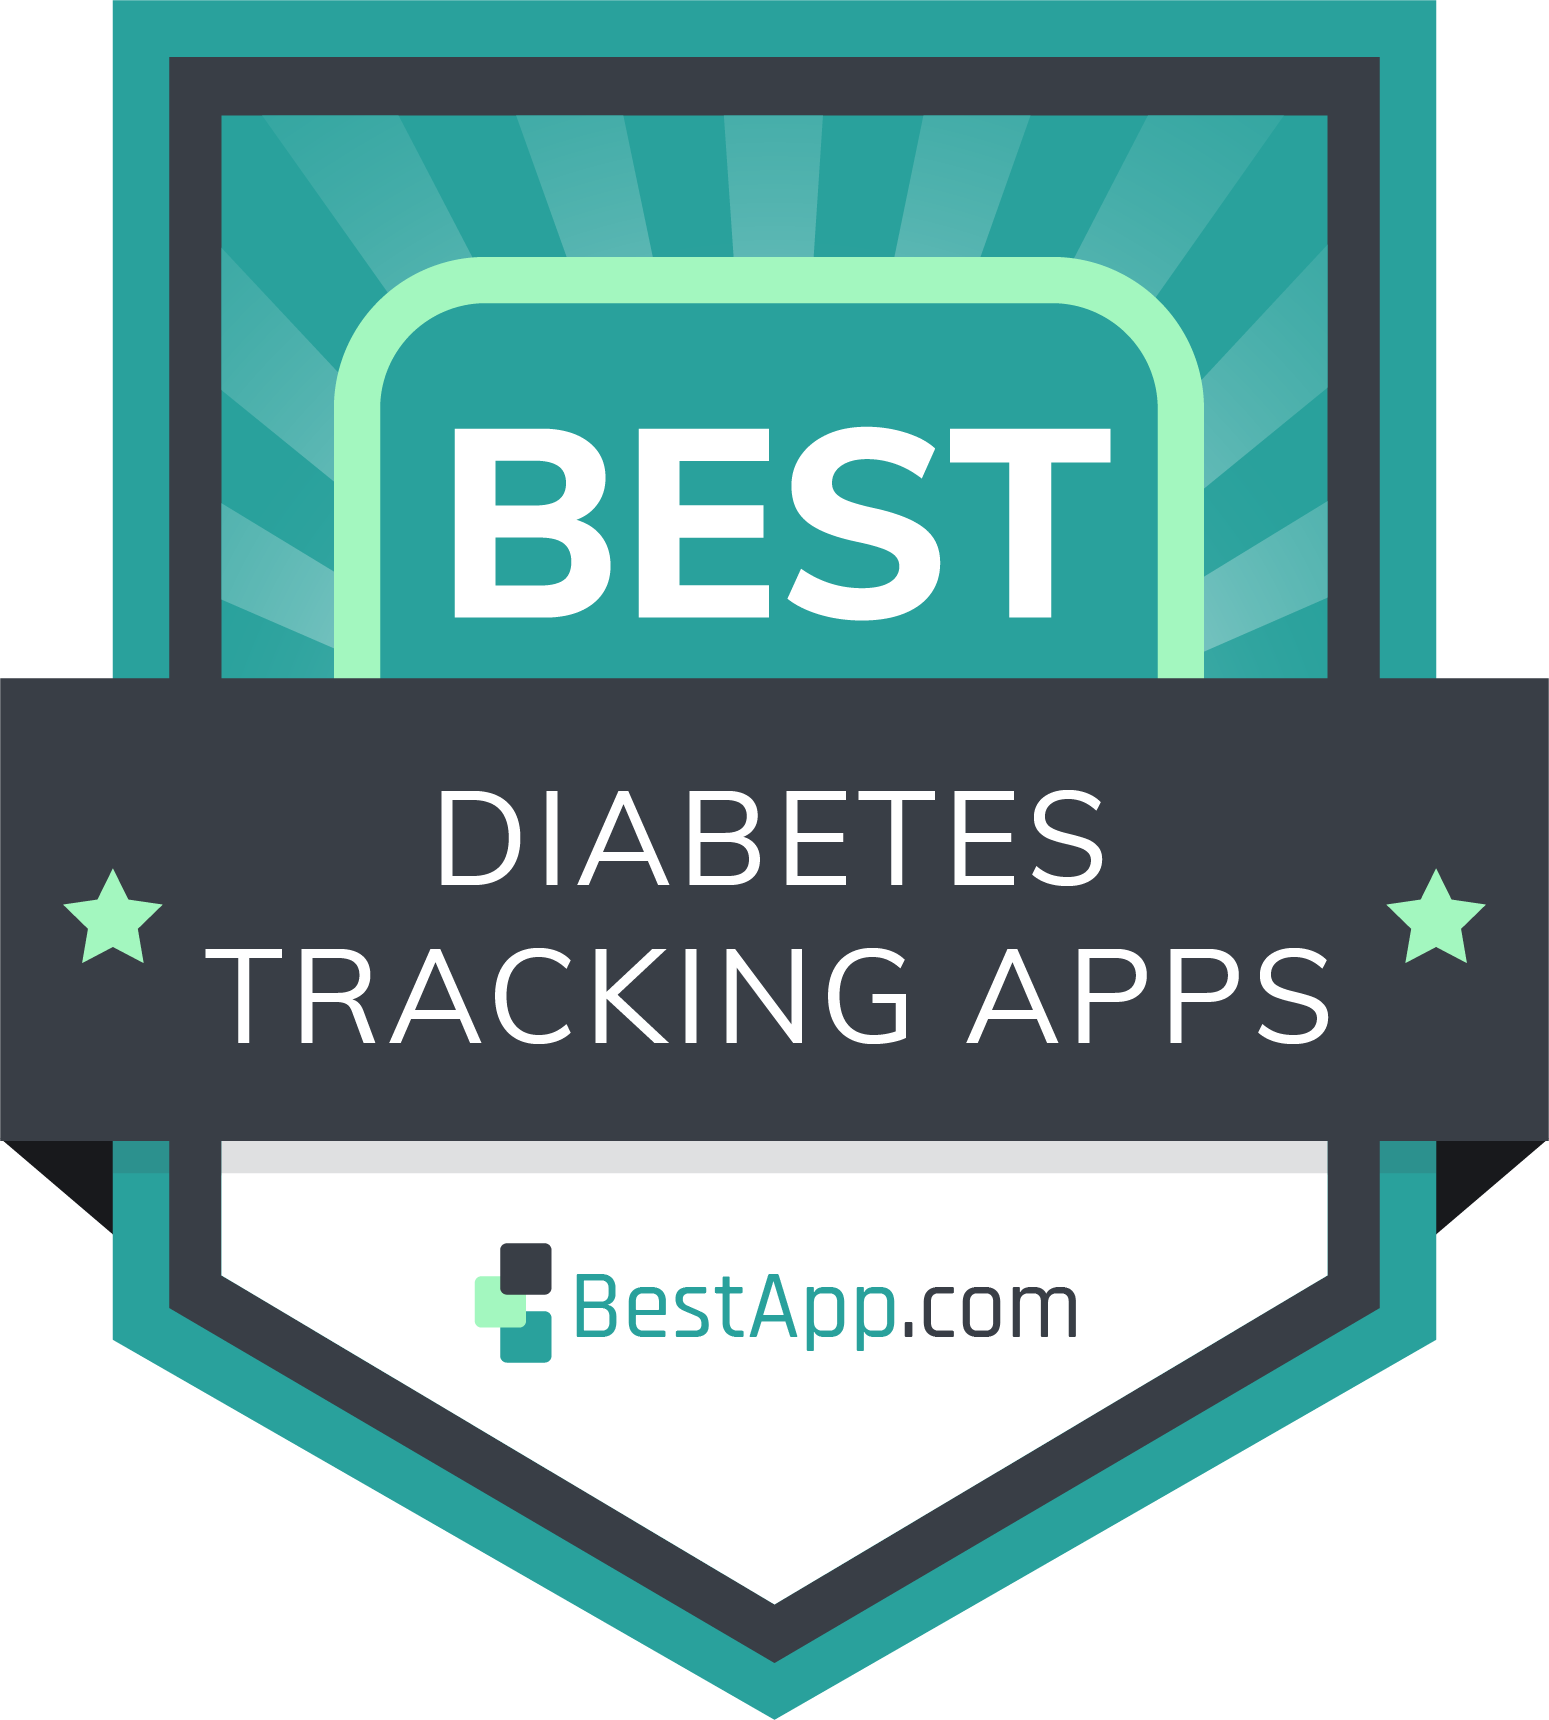 Best Diabetes Tracking Apps Badge